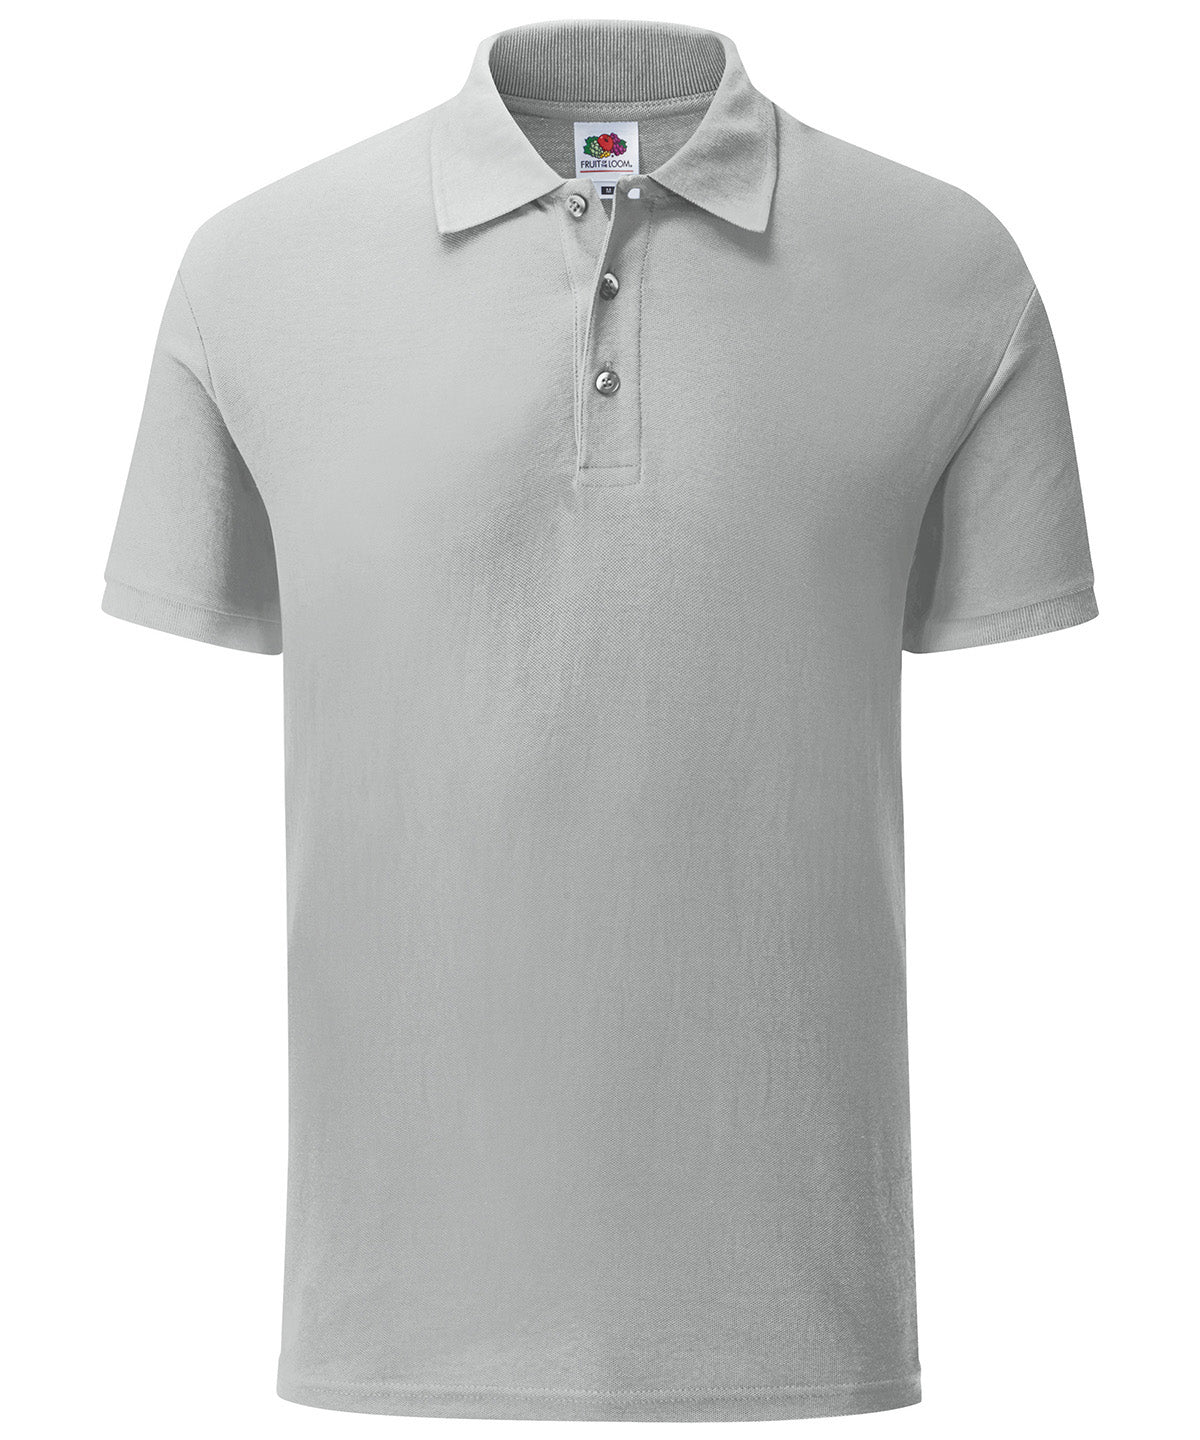 Personalised Polo Shirts - Silver Fruit of the Loom Iconic polo